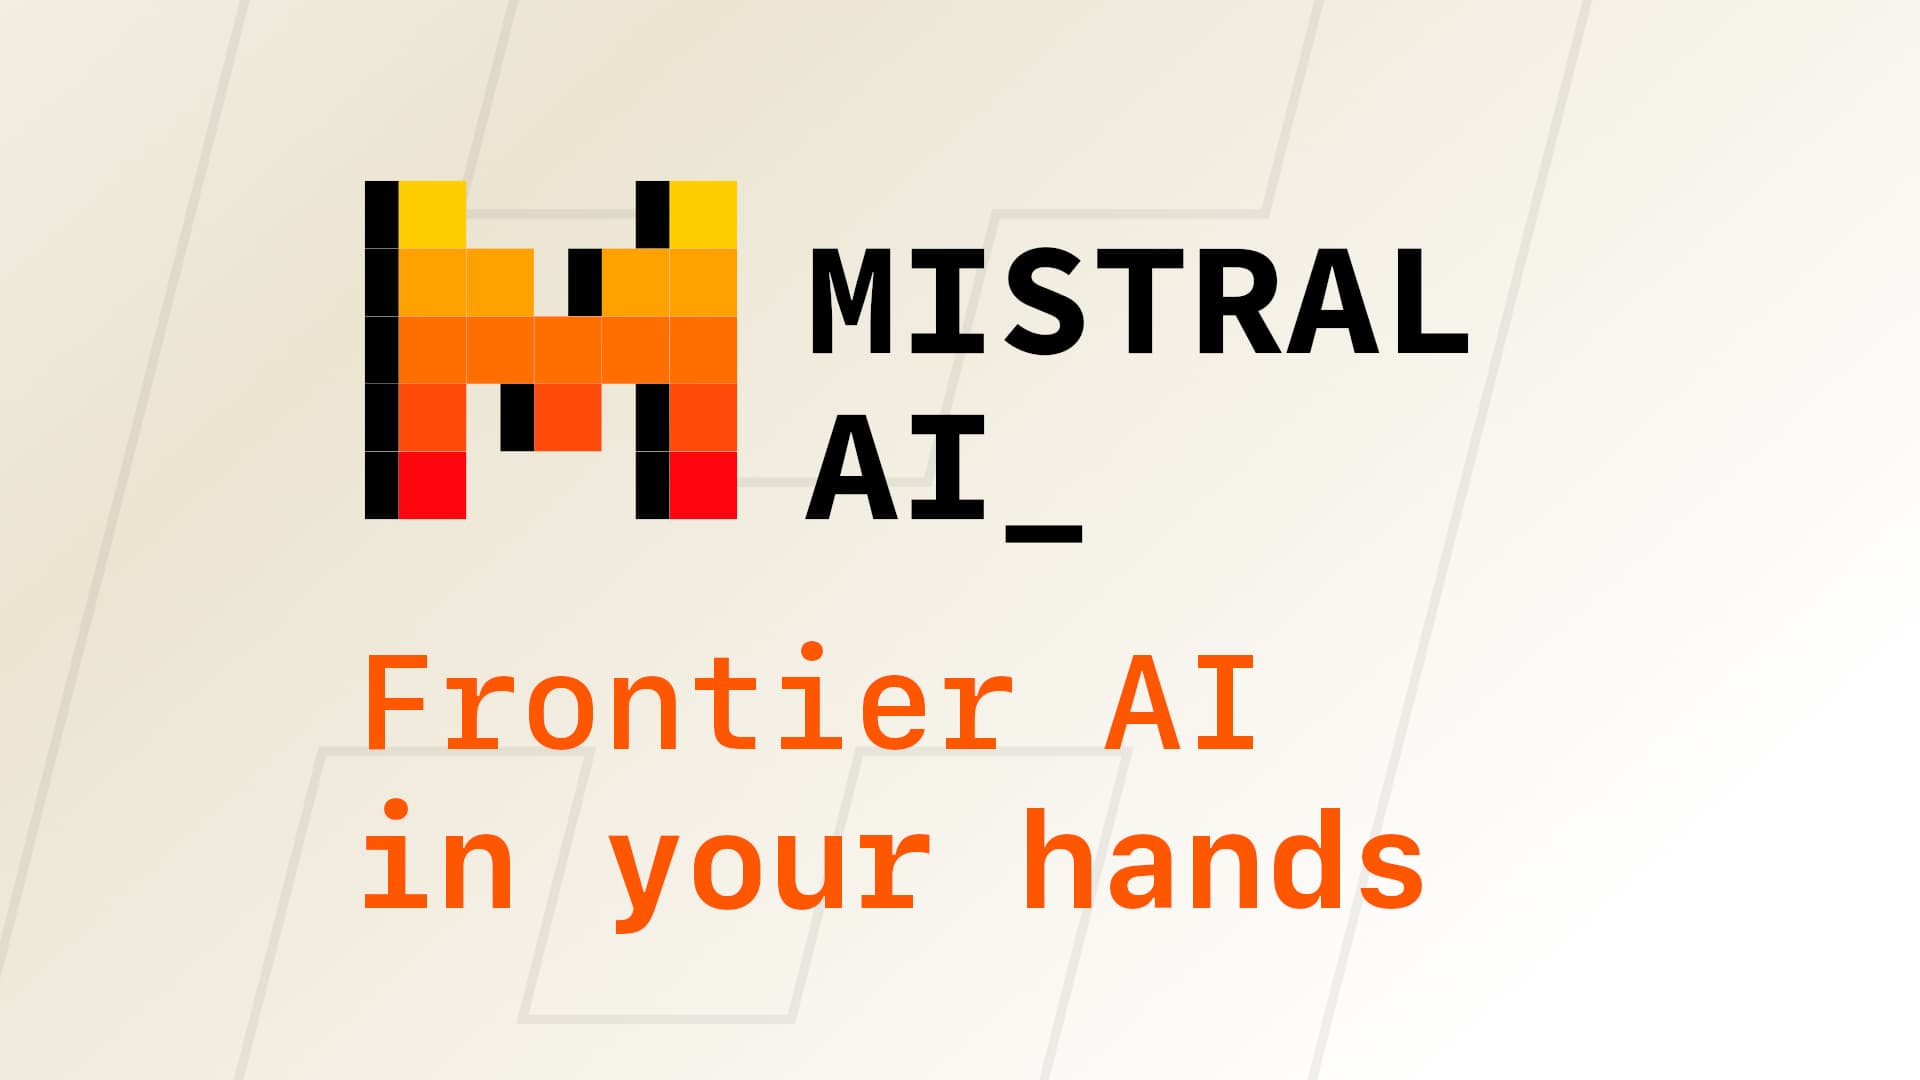 French AI startup Mistral AI has raised €385m in funding